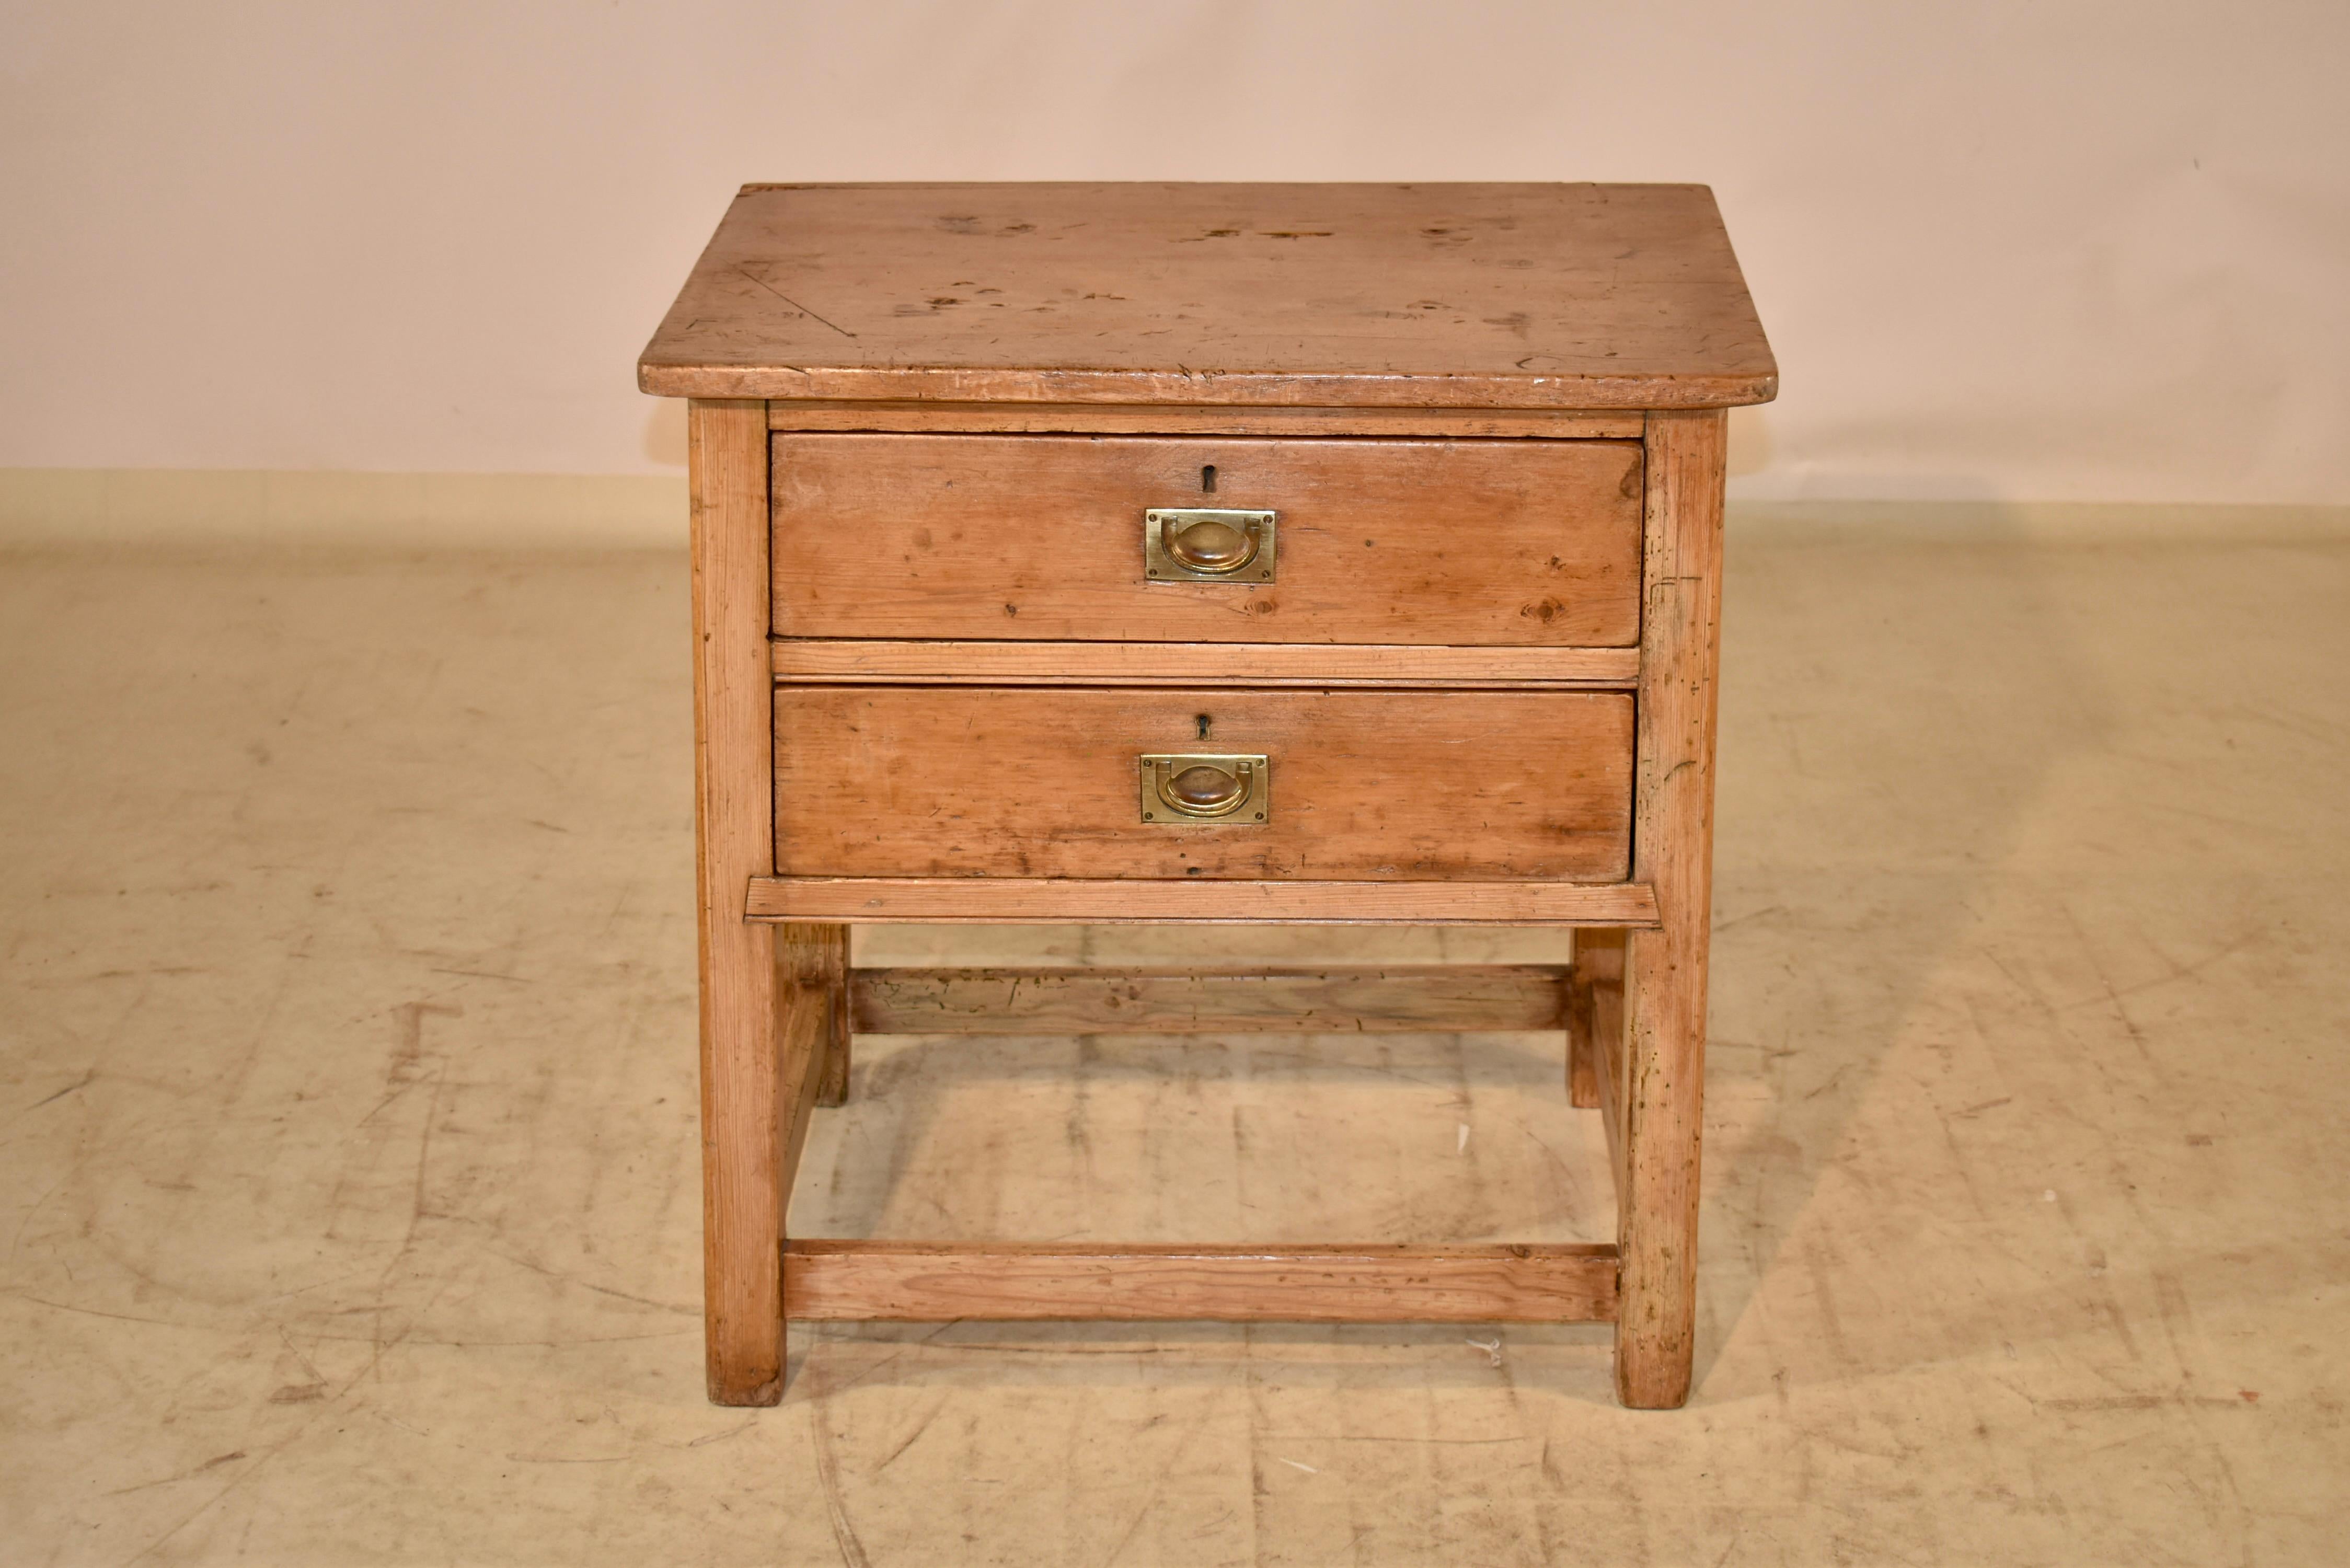 19th century Rustic pine side table from England. The top has rounded front corners, and follows down to simple aprons on the sides. The front of the table has two single drawers, both with inset brass handles. The table is supported on primitive